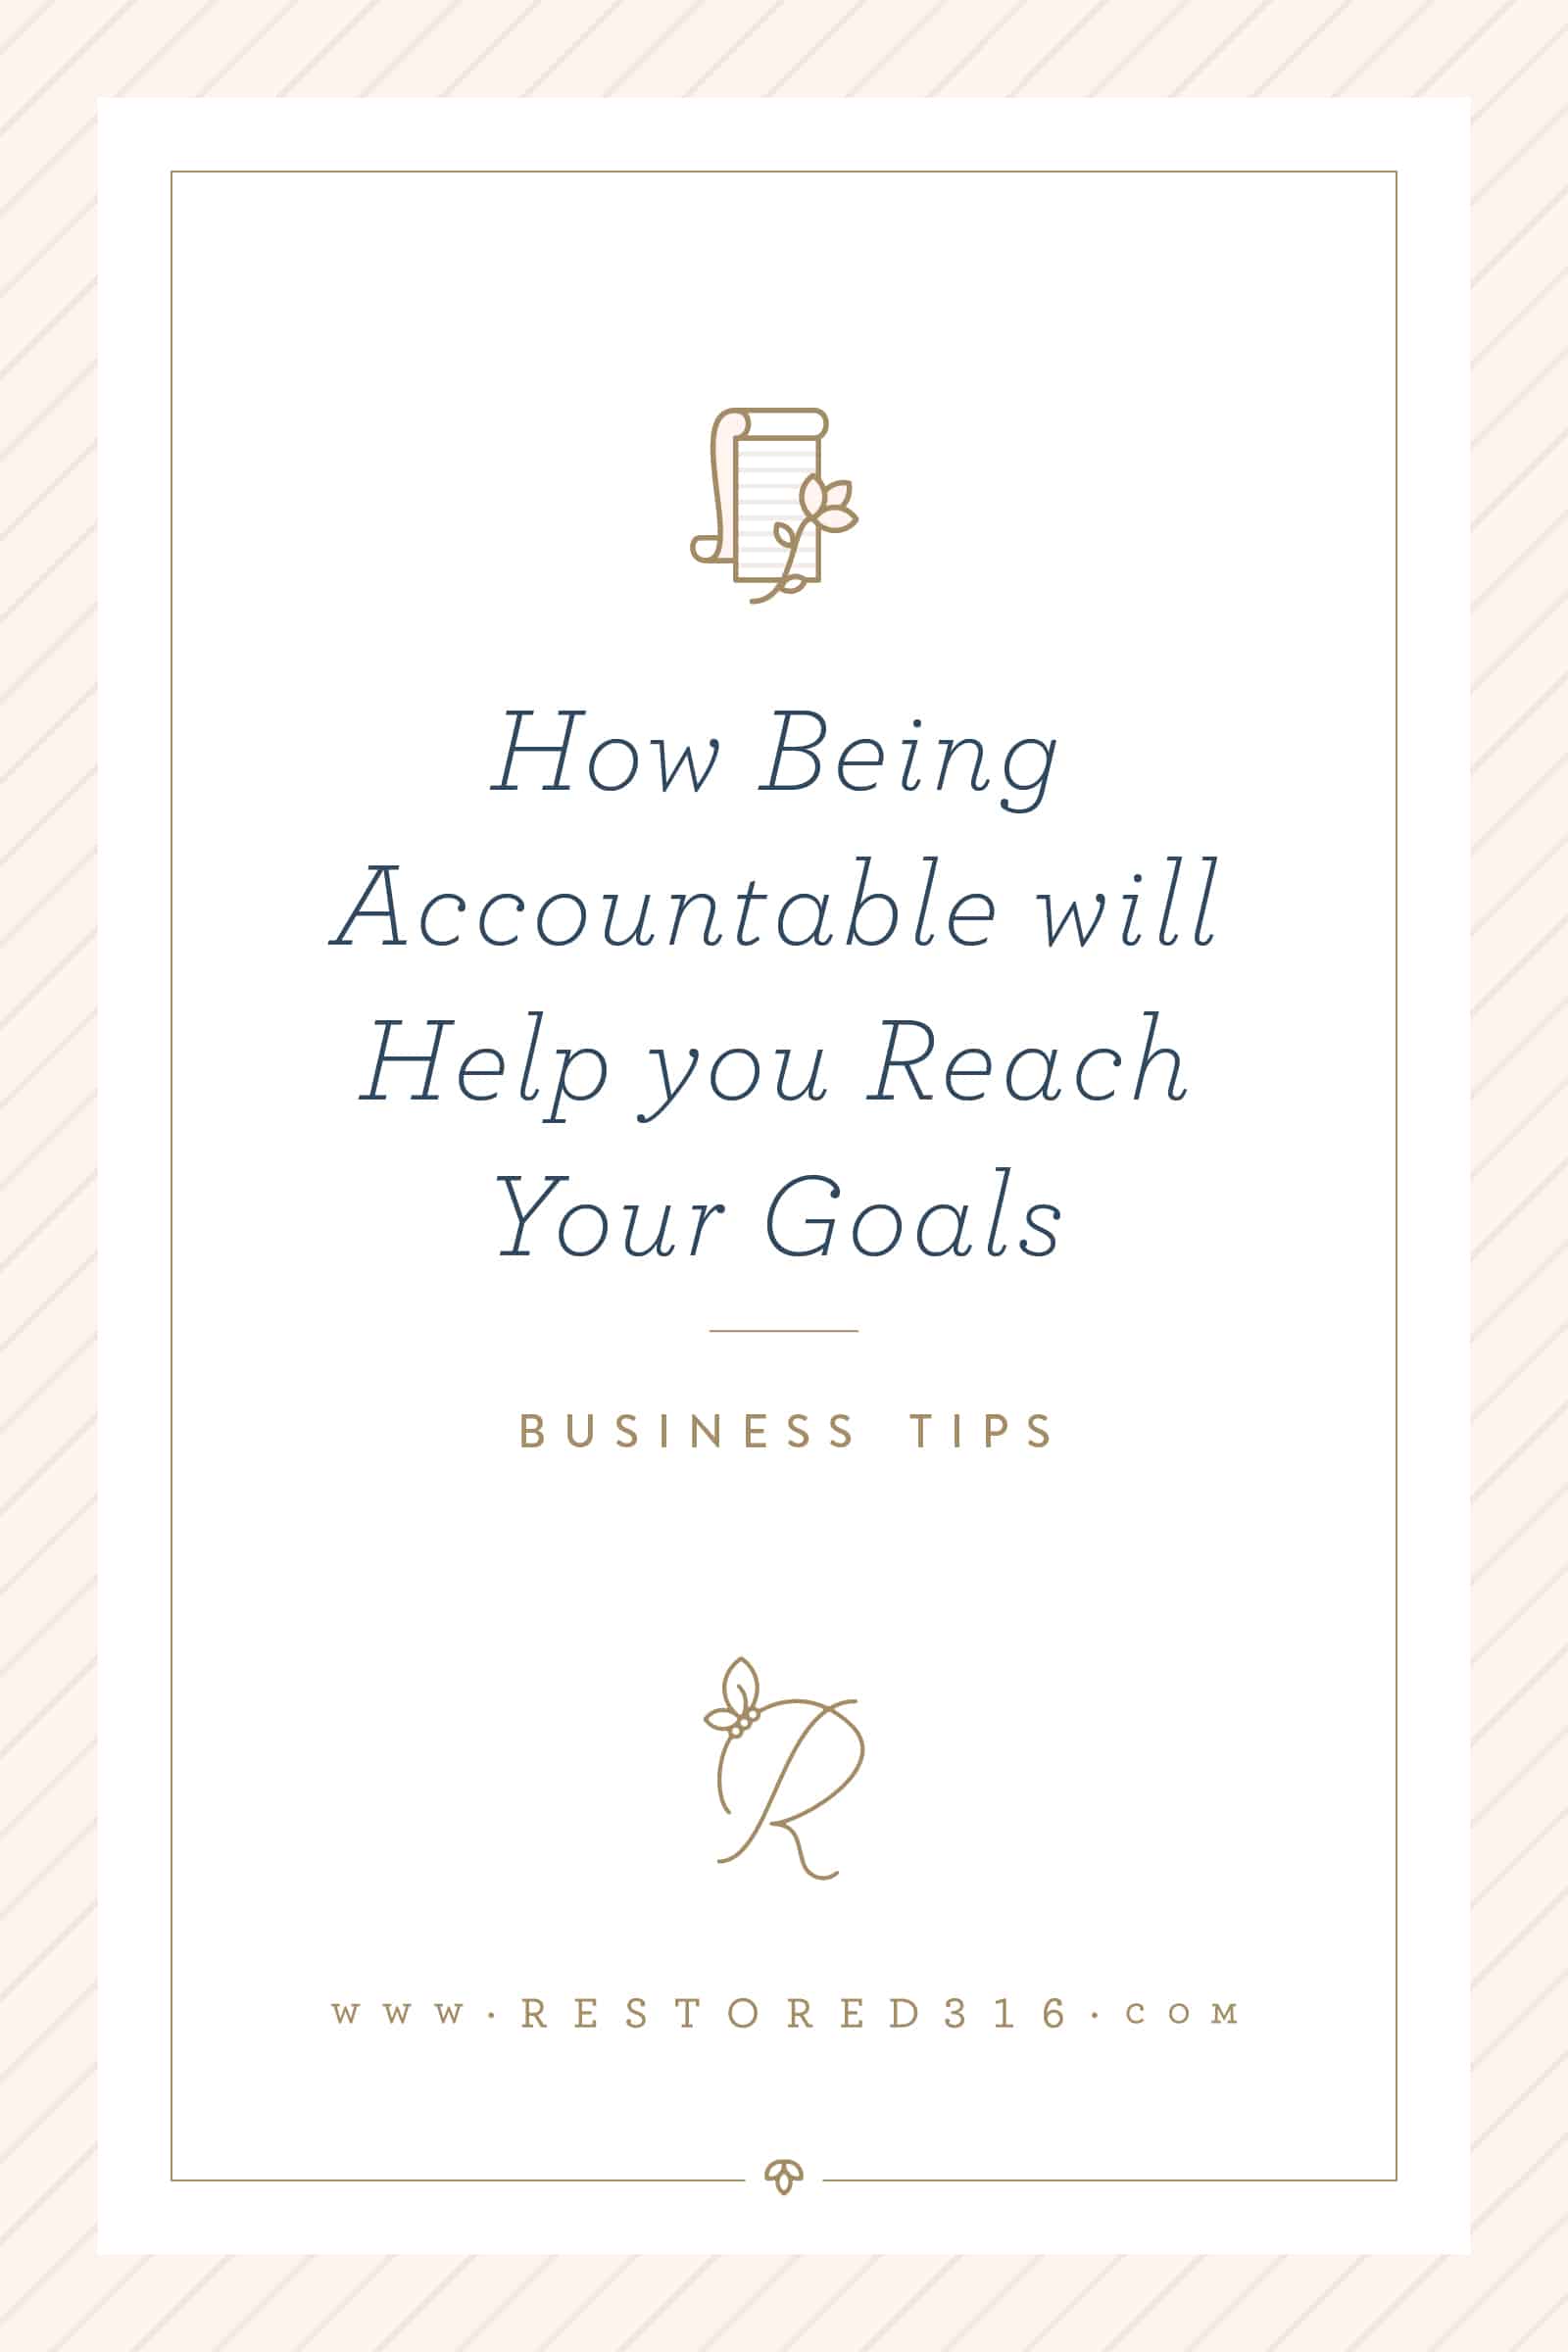 How Being Accountable will Help you Reach Your Goals